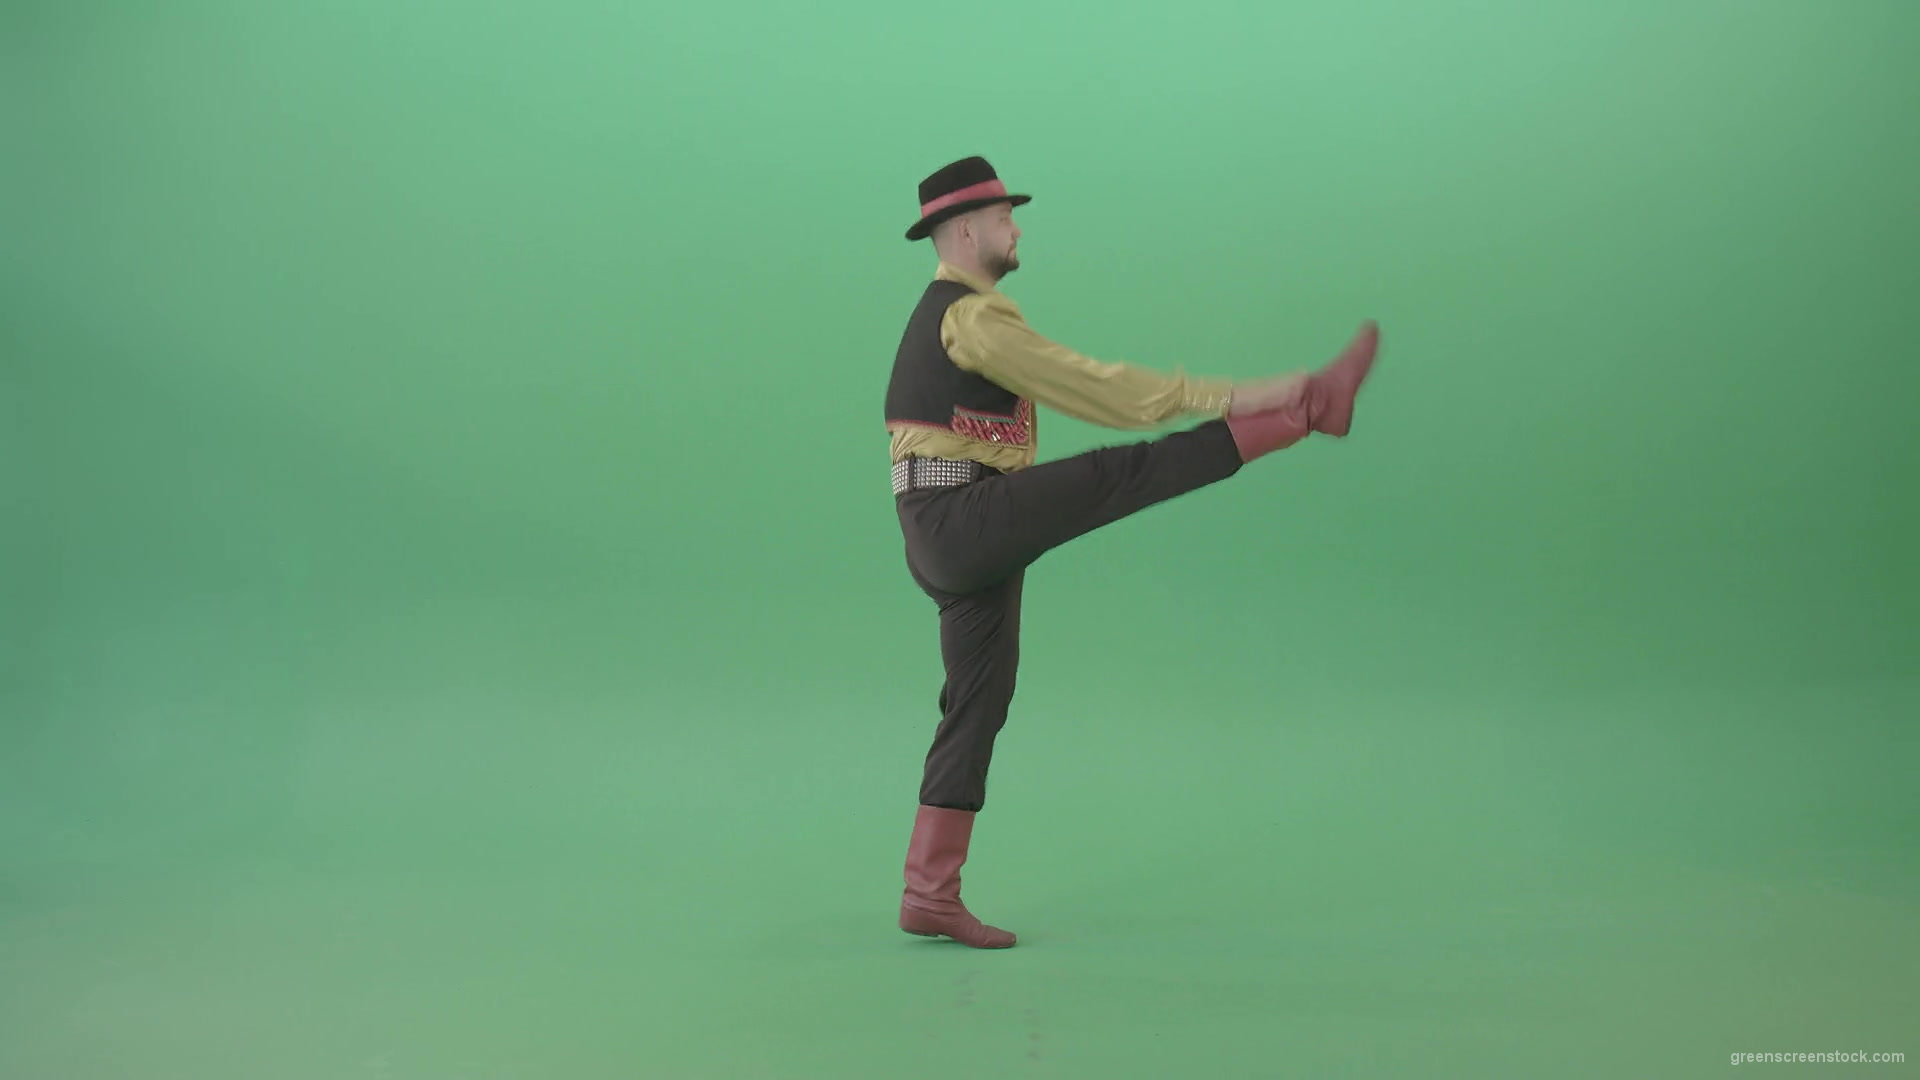 Romanian-Gypsy-Man-dancing-with-clapping-hand-with-side-view-isolated-4K-Green-Screen-Video-Footage-1920_006 Green Screen Stock